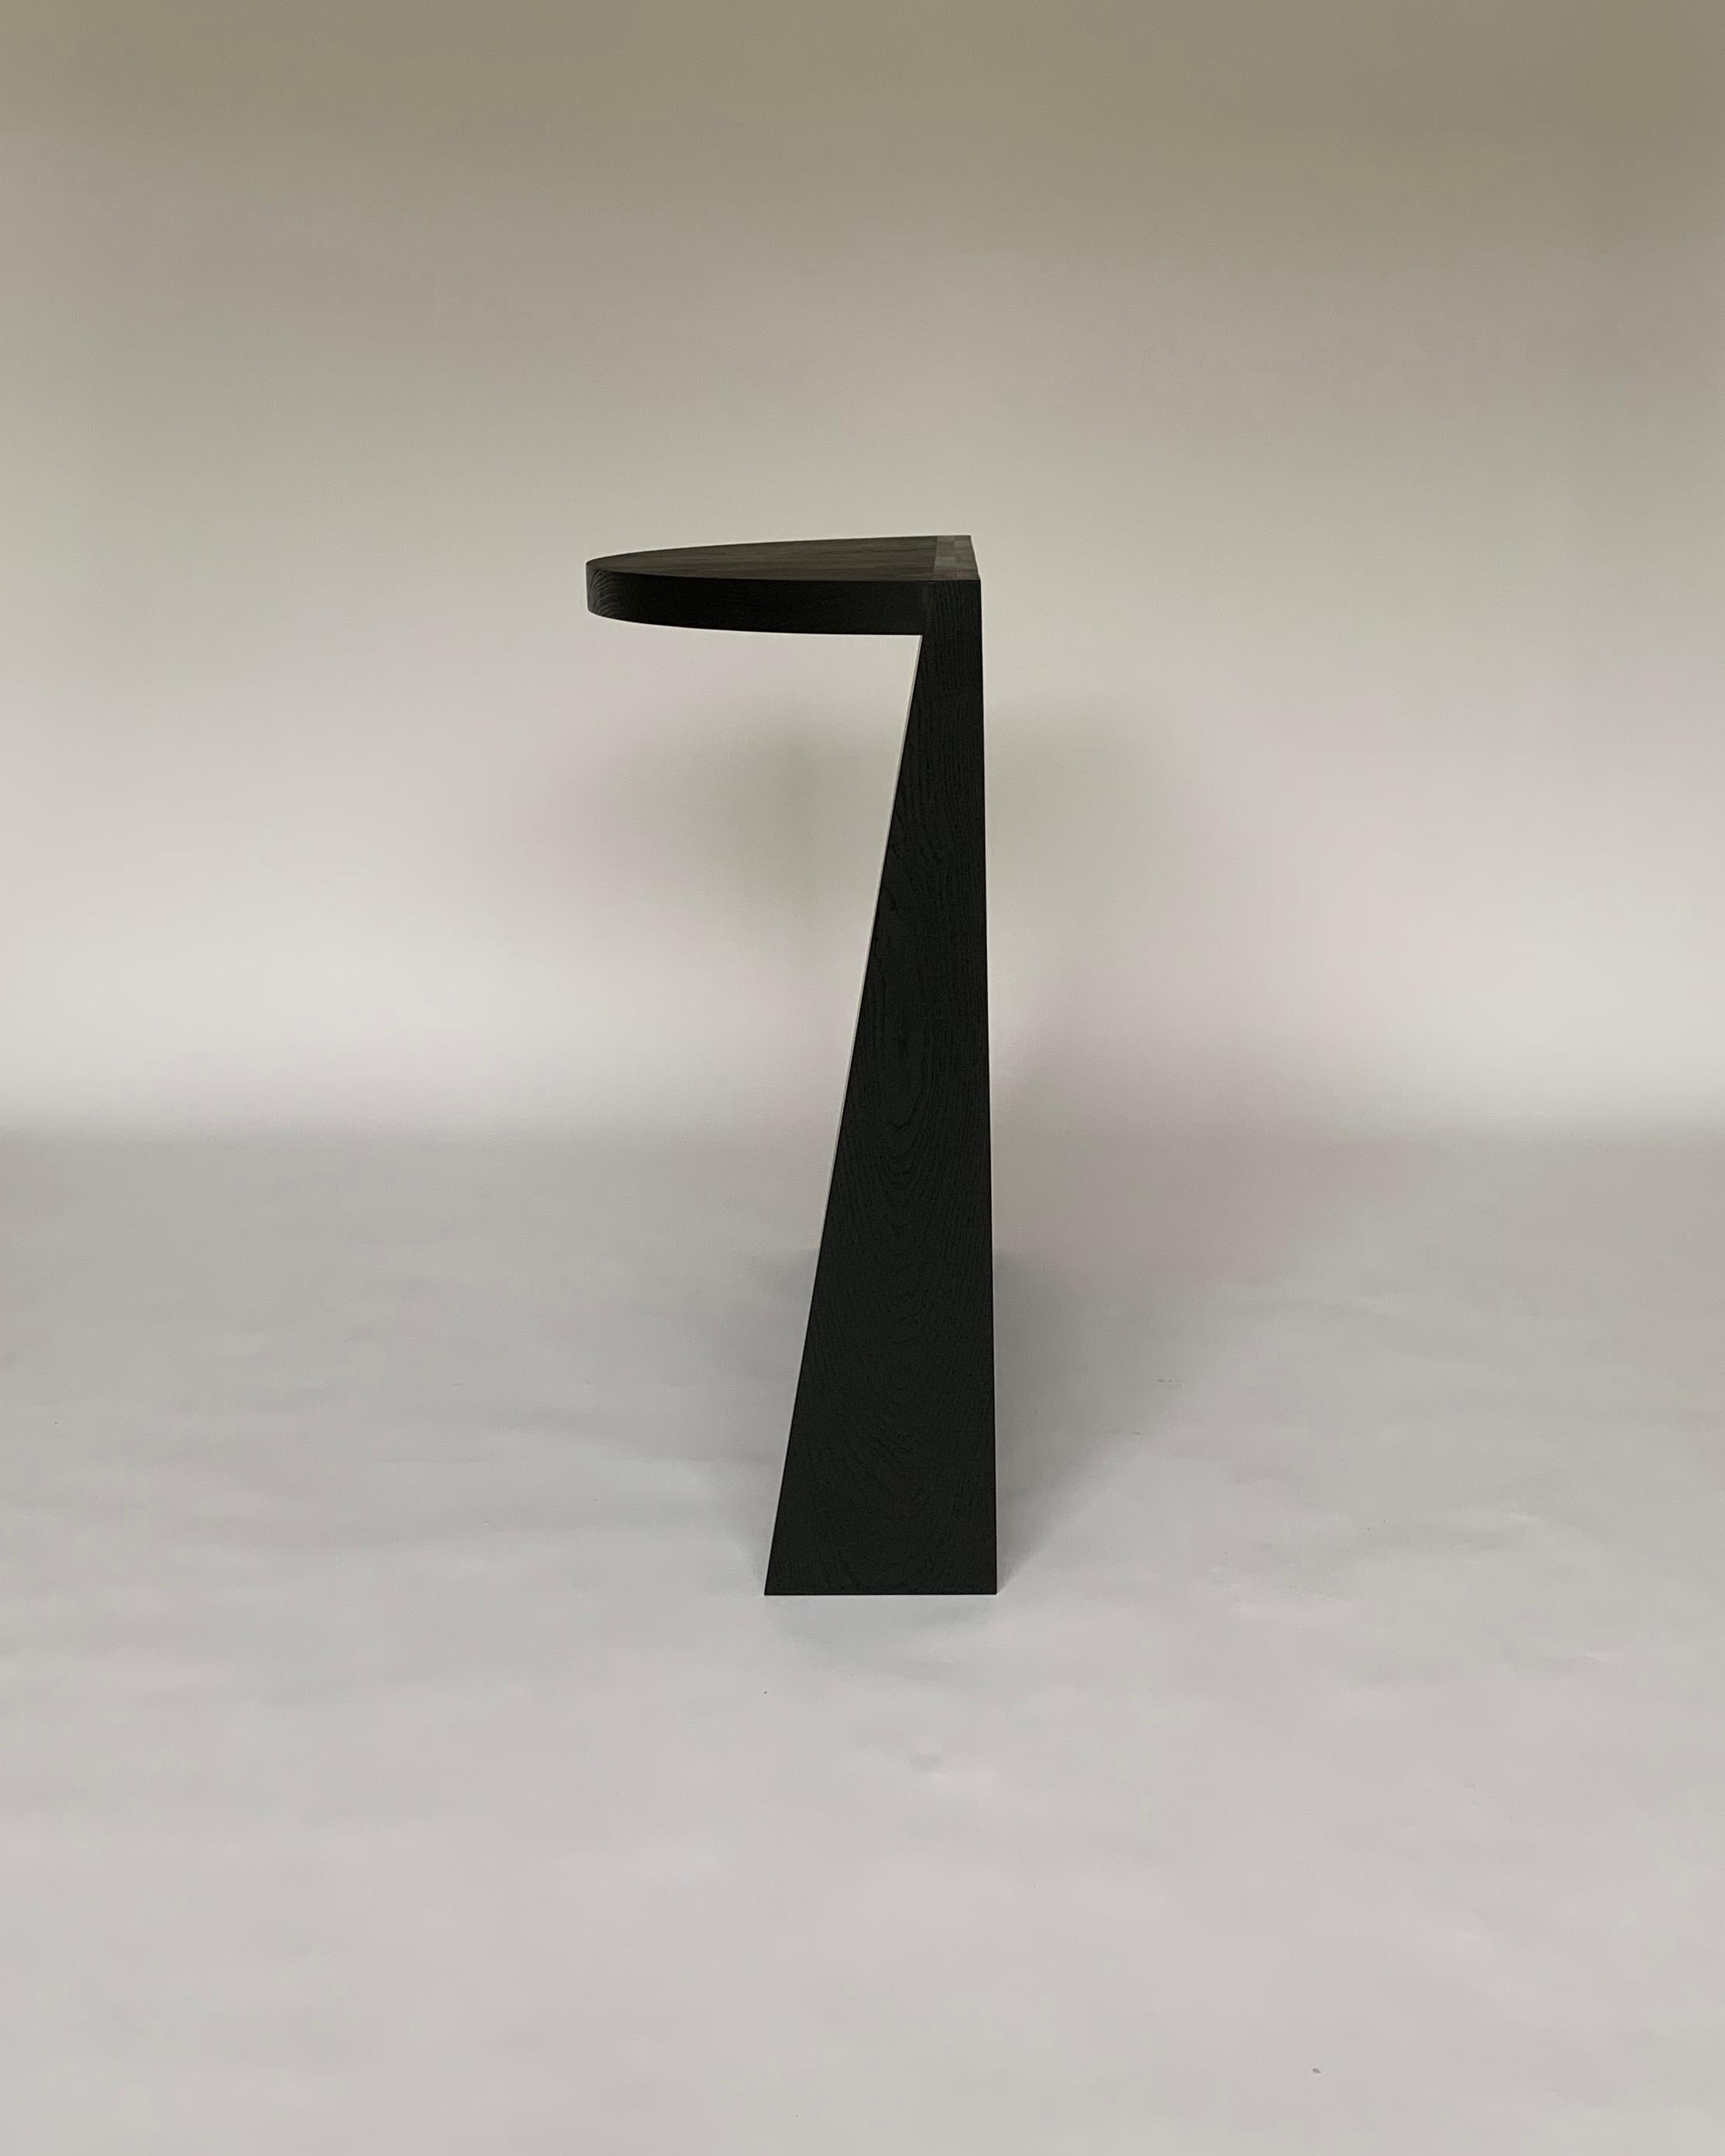 North American Minimal Sculptural Geometric Black Dyed Ash Wood Console Table by Campagna